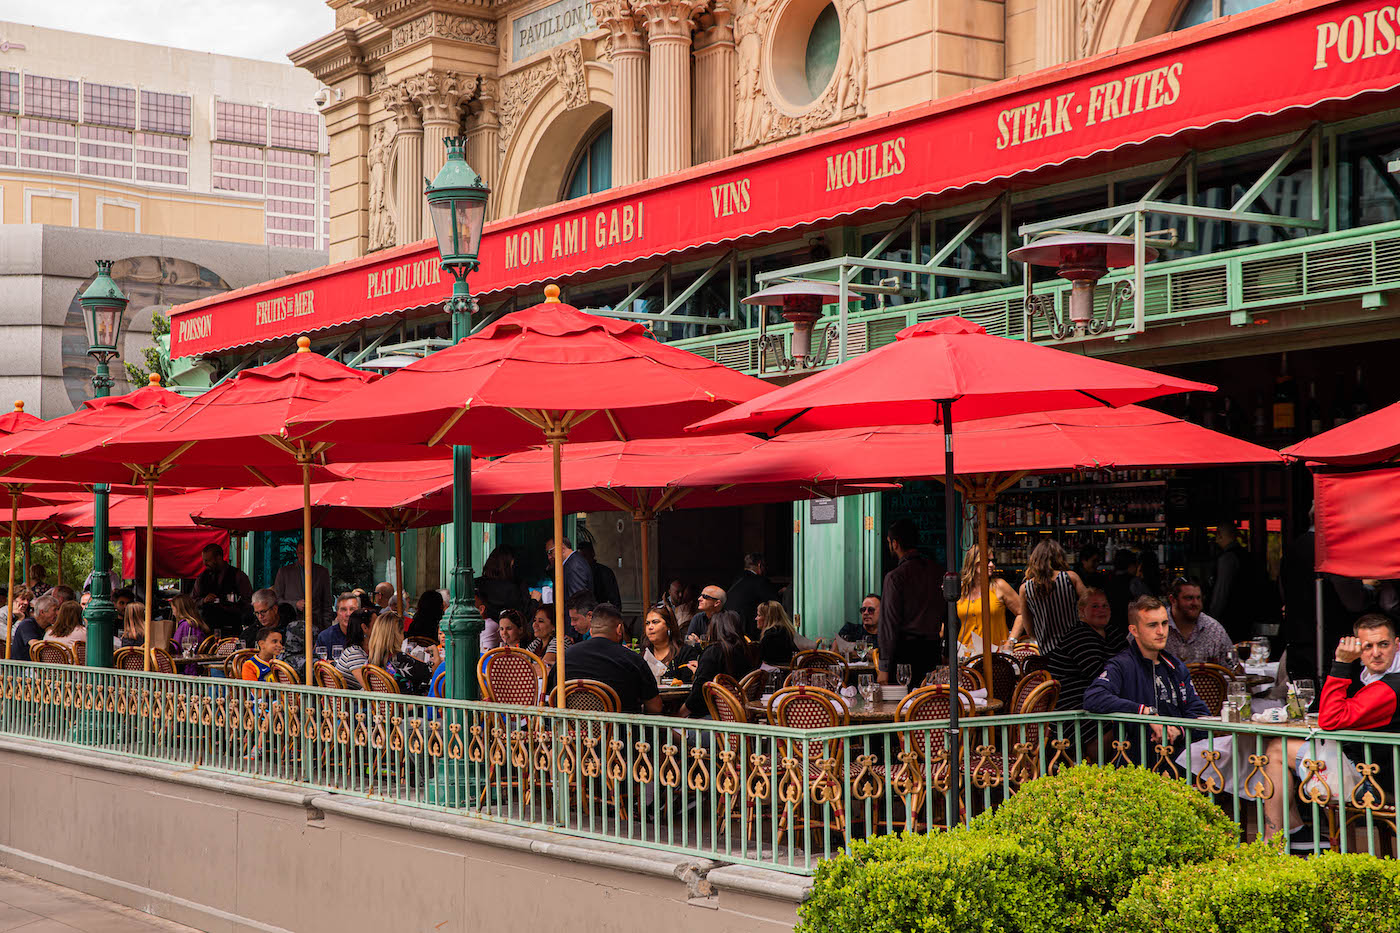 Photo of guests dining at Mon Ami Gabi on the patio with its red umbrellas opened.